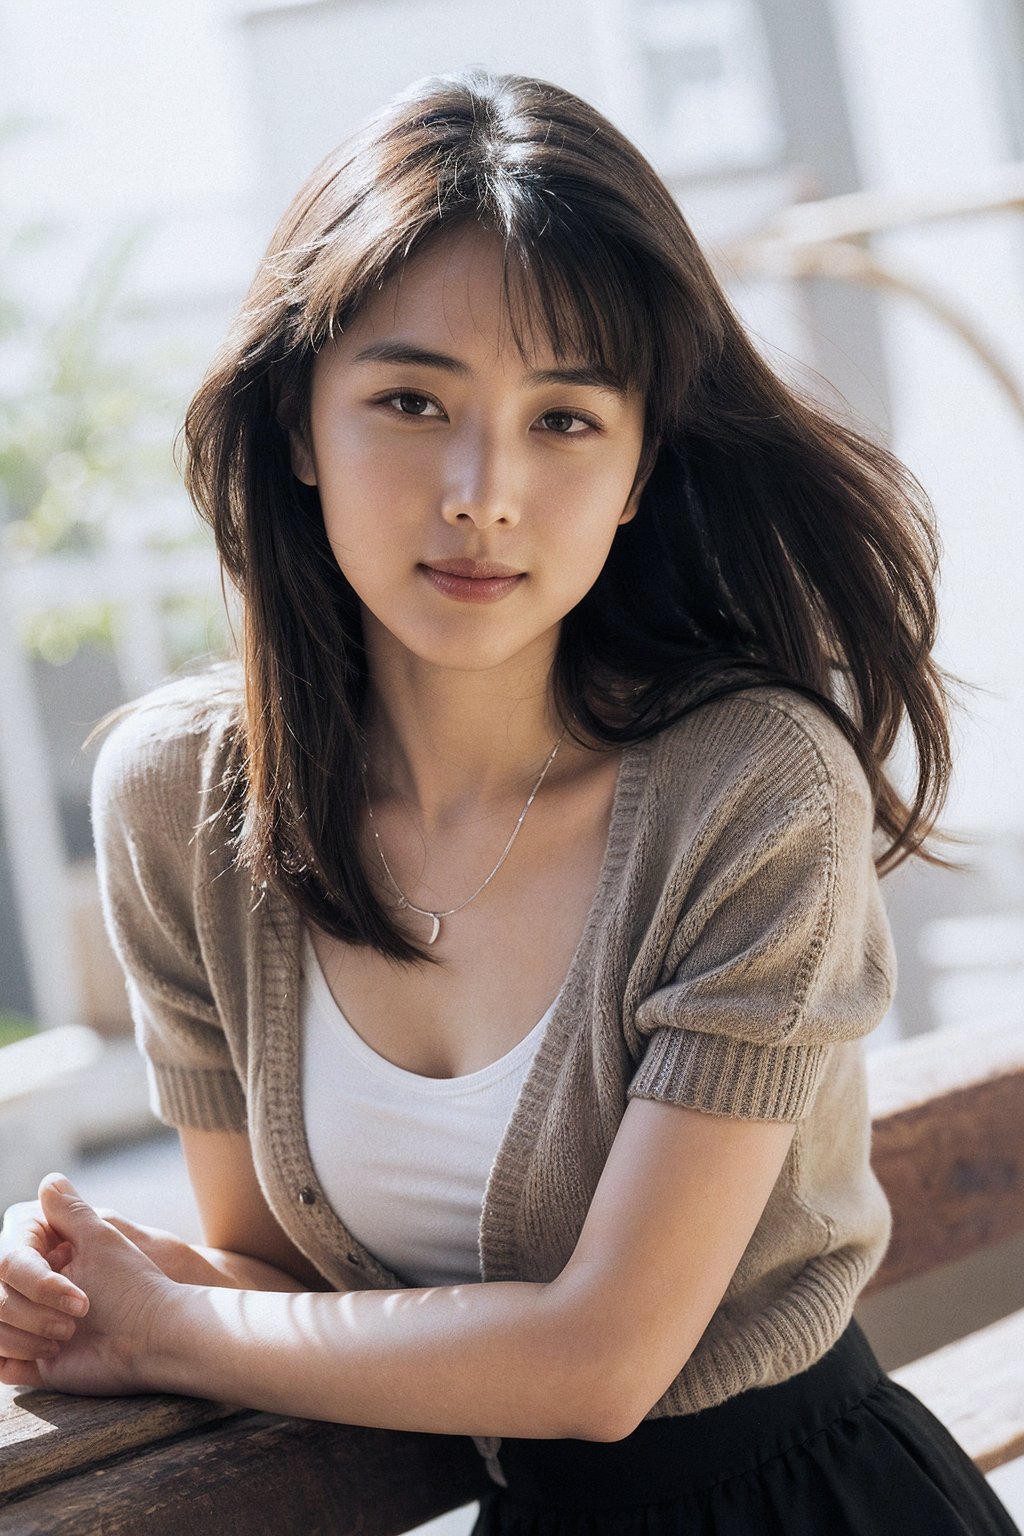 (Best quality, 8k, 32k, Masterpiece, Stunning, Photoreal, high contrast, raw photo, UHD:1.2),Photo of Beautiful Japanese woman, 1girl, 24yo, (medium dark brown hair), (slender eyebrows:1.2), double eyelids, highly detailed glossy eyes, glossy lips, detailed facial, natural round large breasts, wide hips, slender legs, curves body, pale skin, clean skin, detailed skin texture, highly details, necklace, street style outfit, cardigan, short-sleeves shirt, flowey skirt, heels, simple background, bench, sharp focus, (full body composition), charming face, expressive eyes, smile, look at viewer, dynamic angle, legs focus, detailed facial, detailed hair, detailed fabric rendering, detailed background,